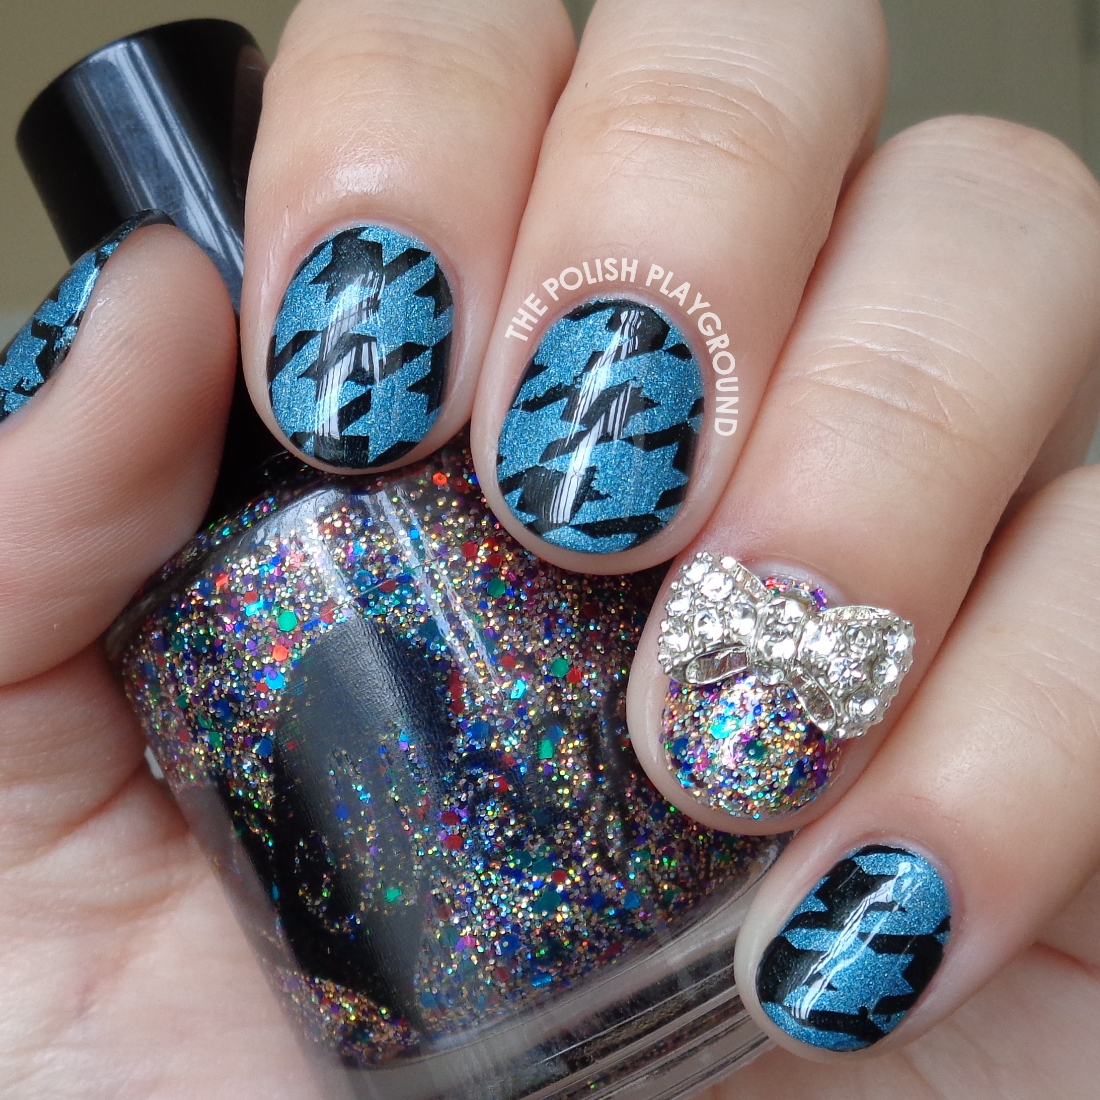 The Polish Playground: Blue and Black Houndstooth Stamping